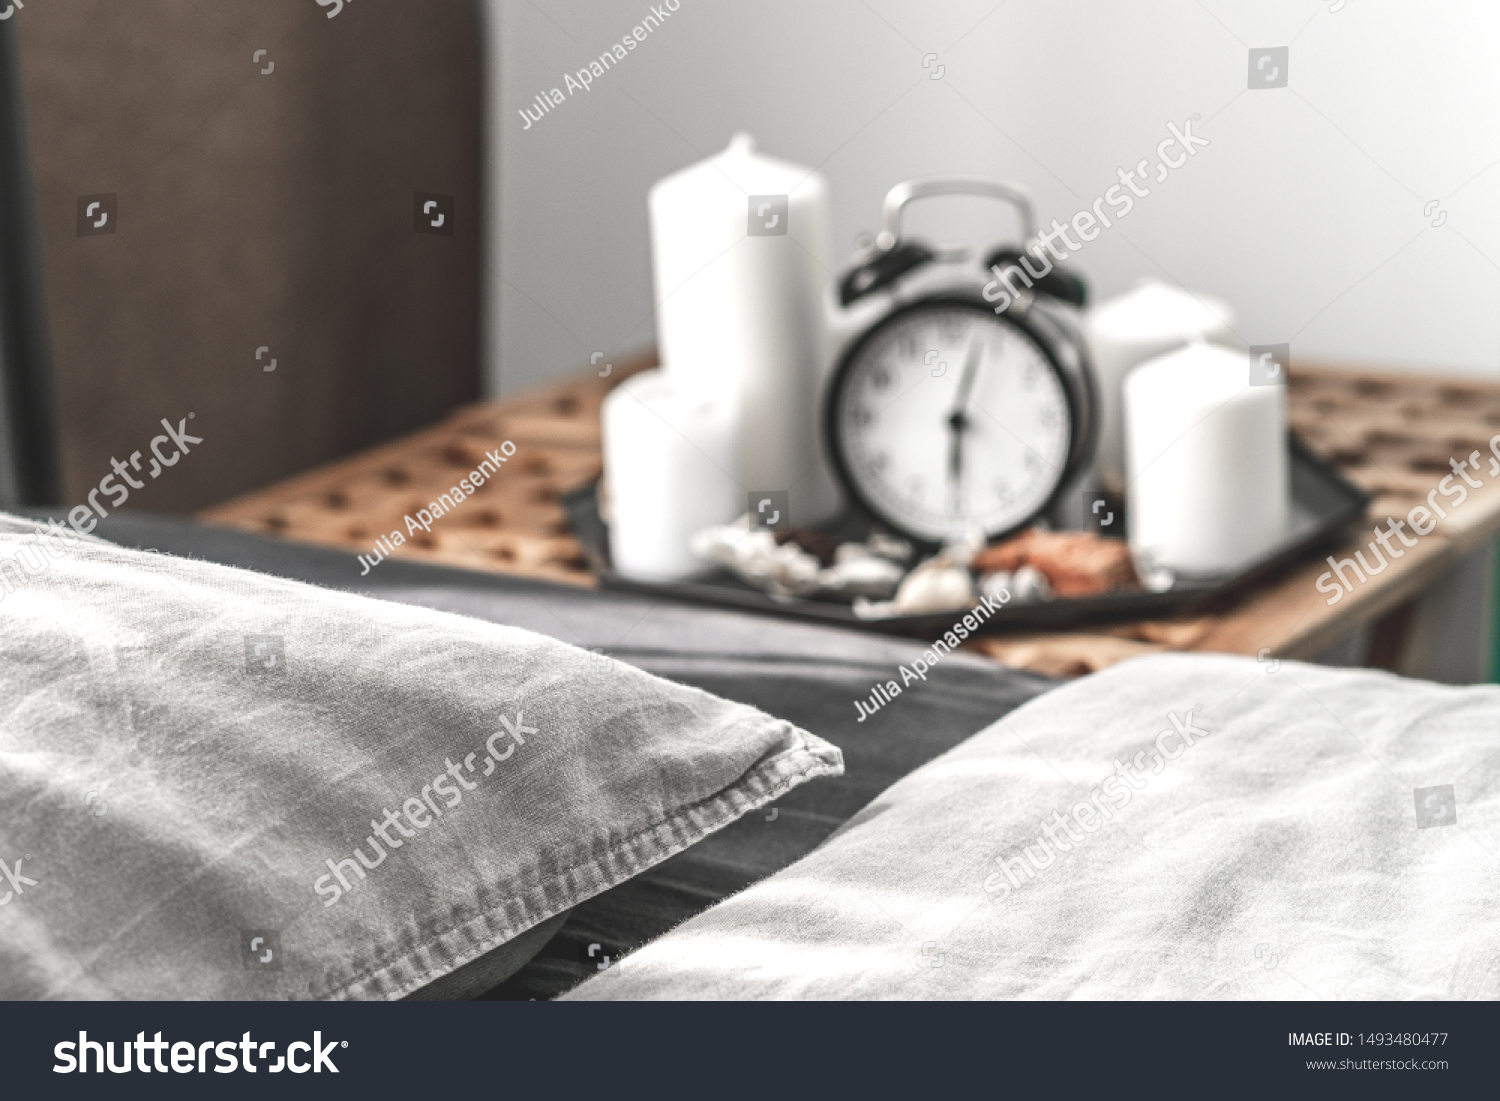 Cozy gray bedroom interior with comfortable bed near the wooden night table with candle, alarm clock and dried flowers. Cozy atmosphere at home. Warming up the cold evenings. Vintage furniture.  #1493480477